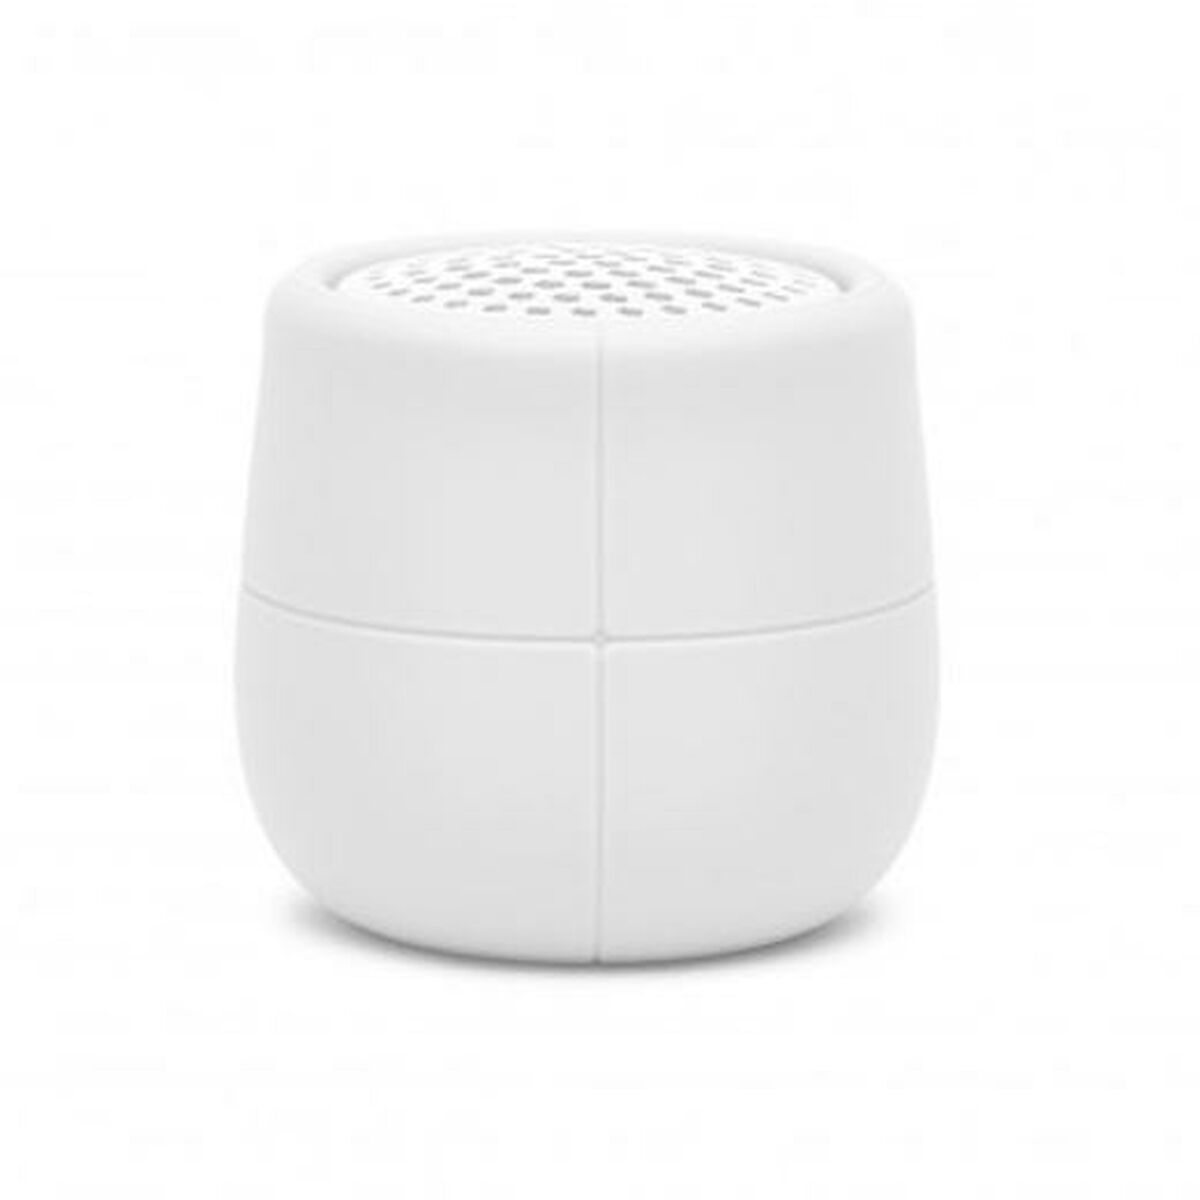 Portable Bluetooth Speakers Lexon Mino X White 3 W, Lexon, Electronics, Mobile communication and accessories, portable-bluetooth-speakers-lexon-mino-x-white-3-w, Brand_Lexon, category-reference-2609, category-reference-2882, category-reference-2923, category-reference-t-19653, category-reference-t-21311, category-reference-t-25527, category-reference-t-4036, category-reference-t-4037, Condition_NEW, entertainment, music, office, Price_20 - 50, telephones & tablets, wifi y bluetooth, RiotNook